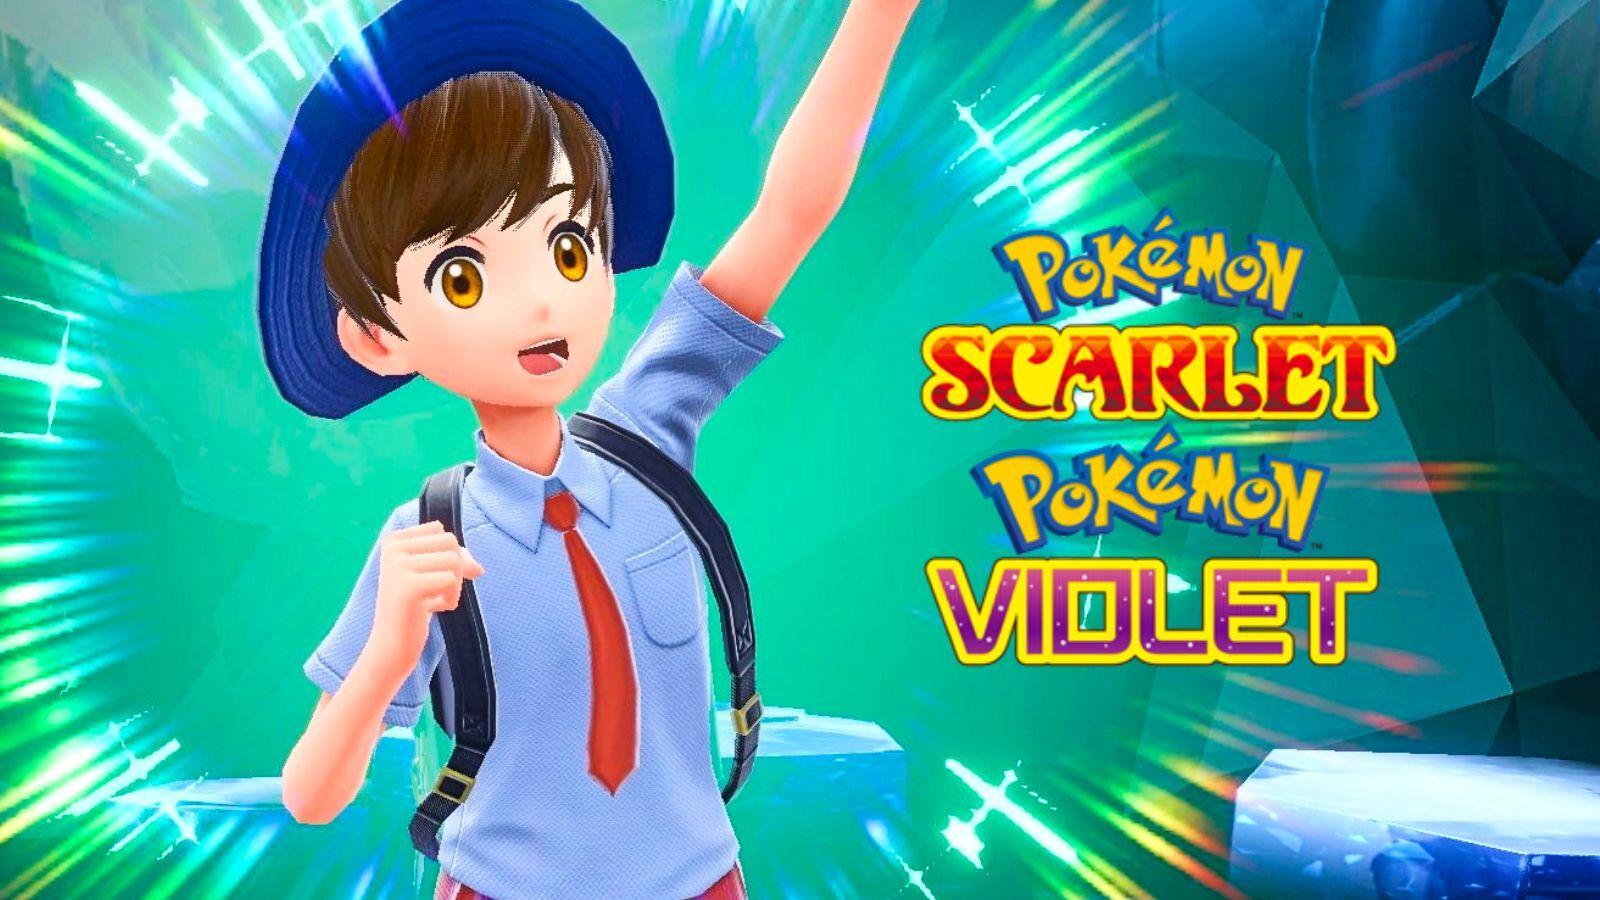 Pokemon Scarlet and Violet's Entire Pokedex Leaks Online With Images